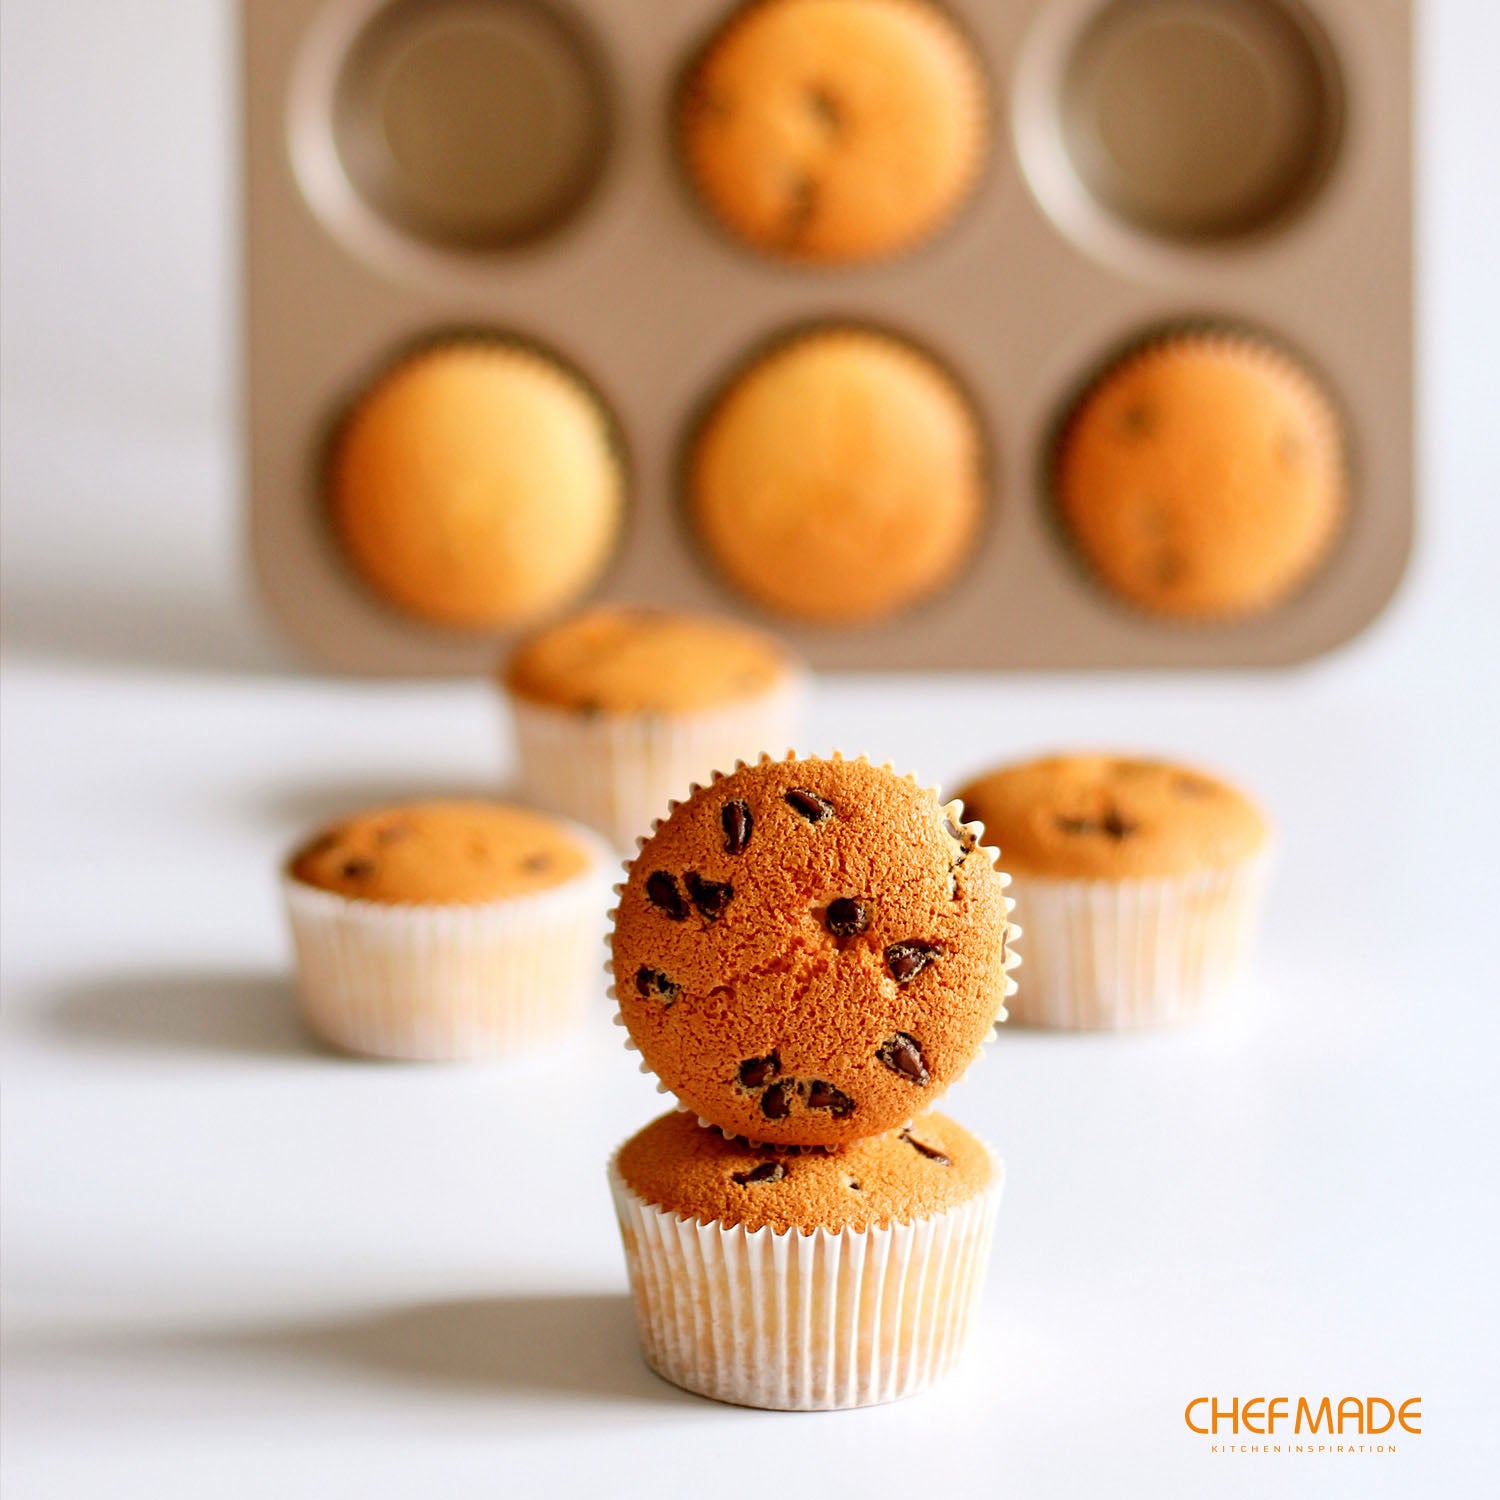 Muffin Pan Media 12 Well - CHEFMADE official store